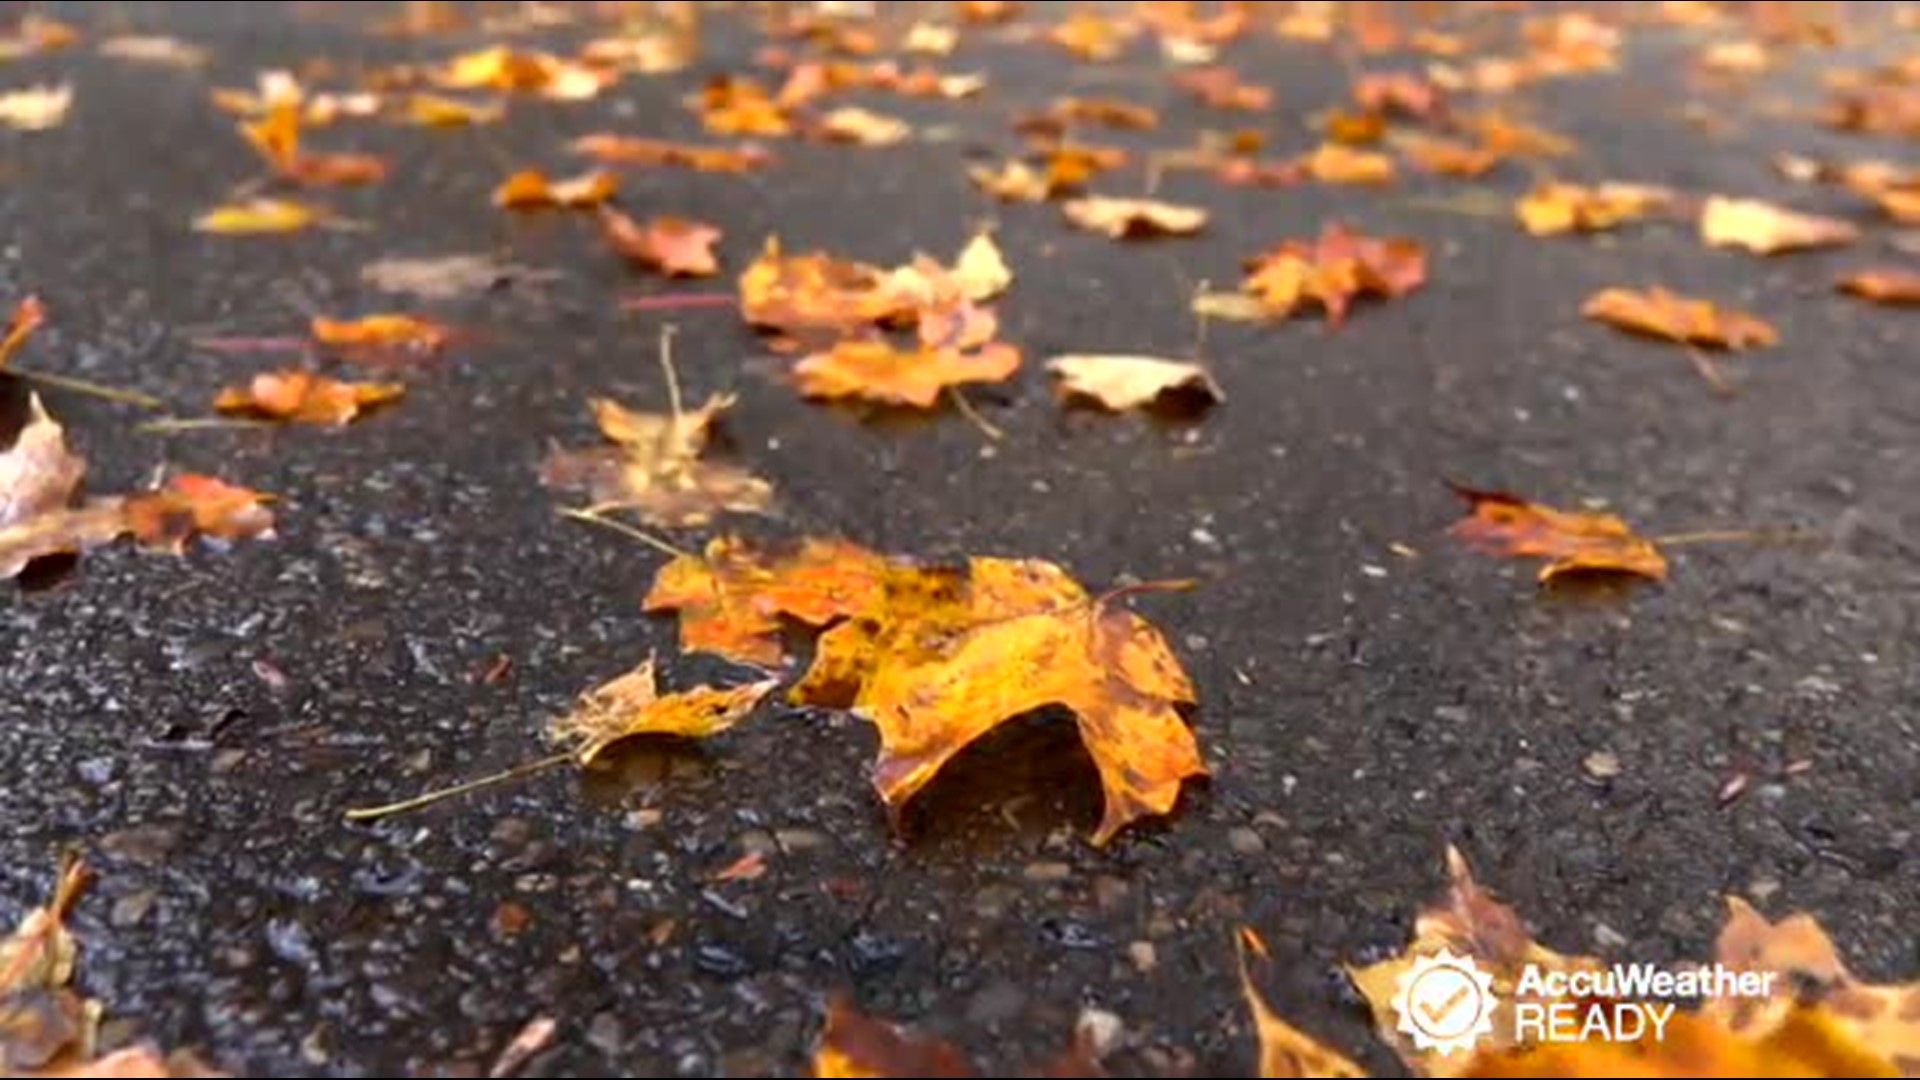 Autumn leaves are beautiful to look at and watch as they fall to the ground, but once they are on the ground, they can be dangerous to drive on, especially if it rains.